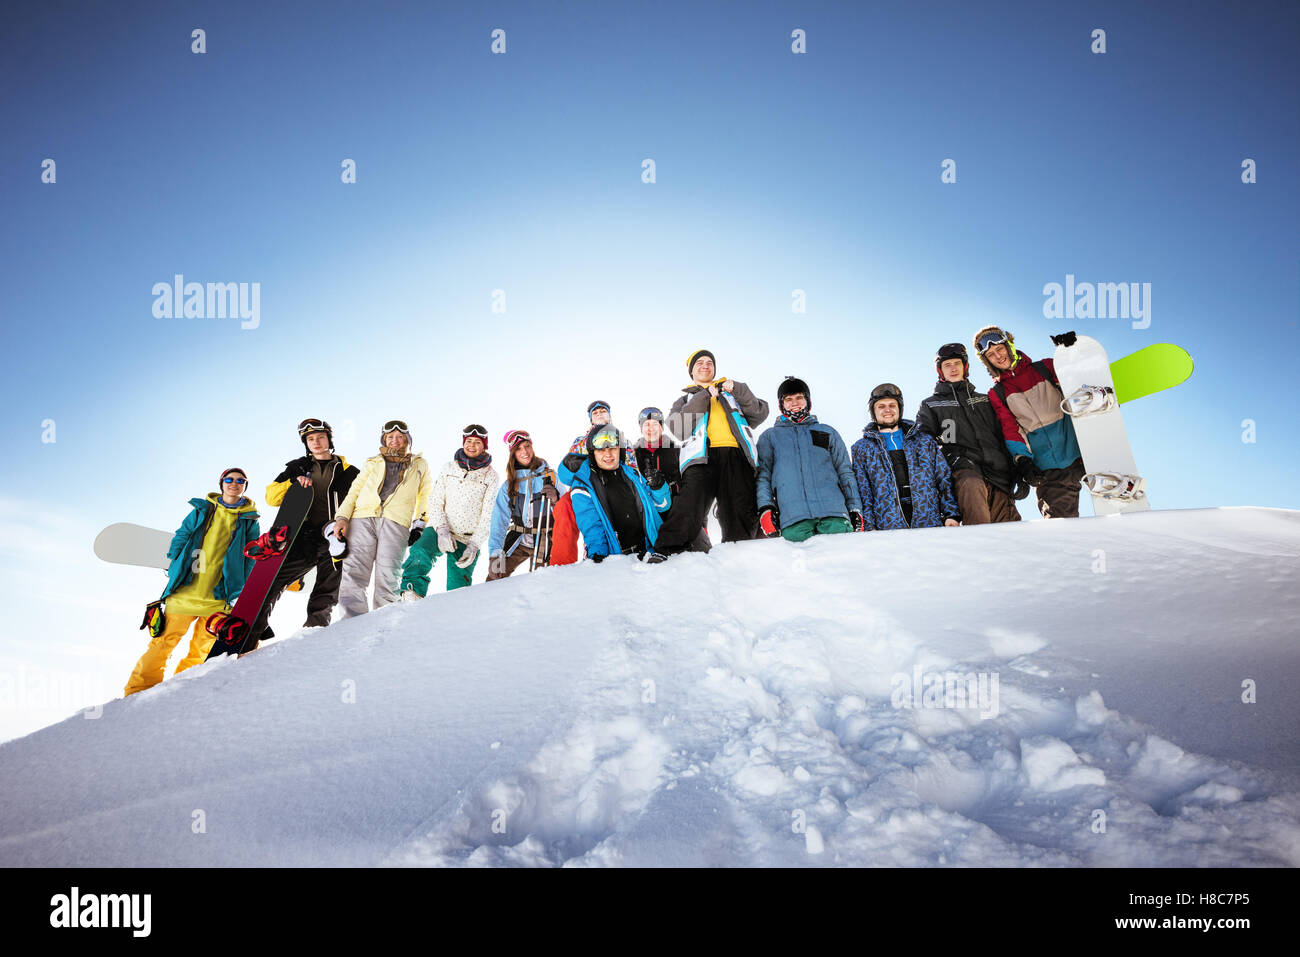 Group of skiers and snowboarders Stock Photo